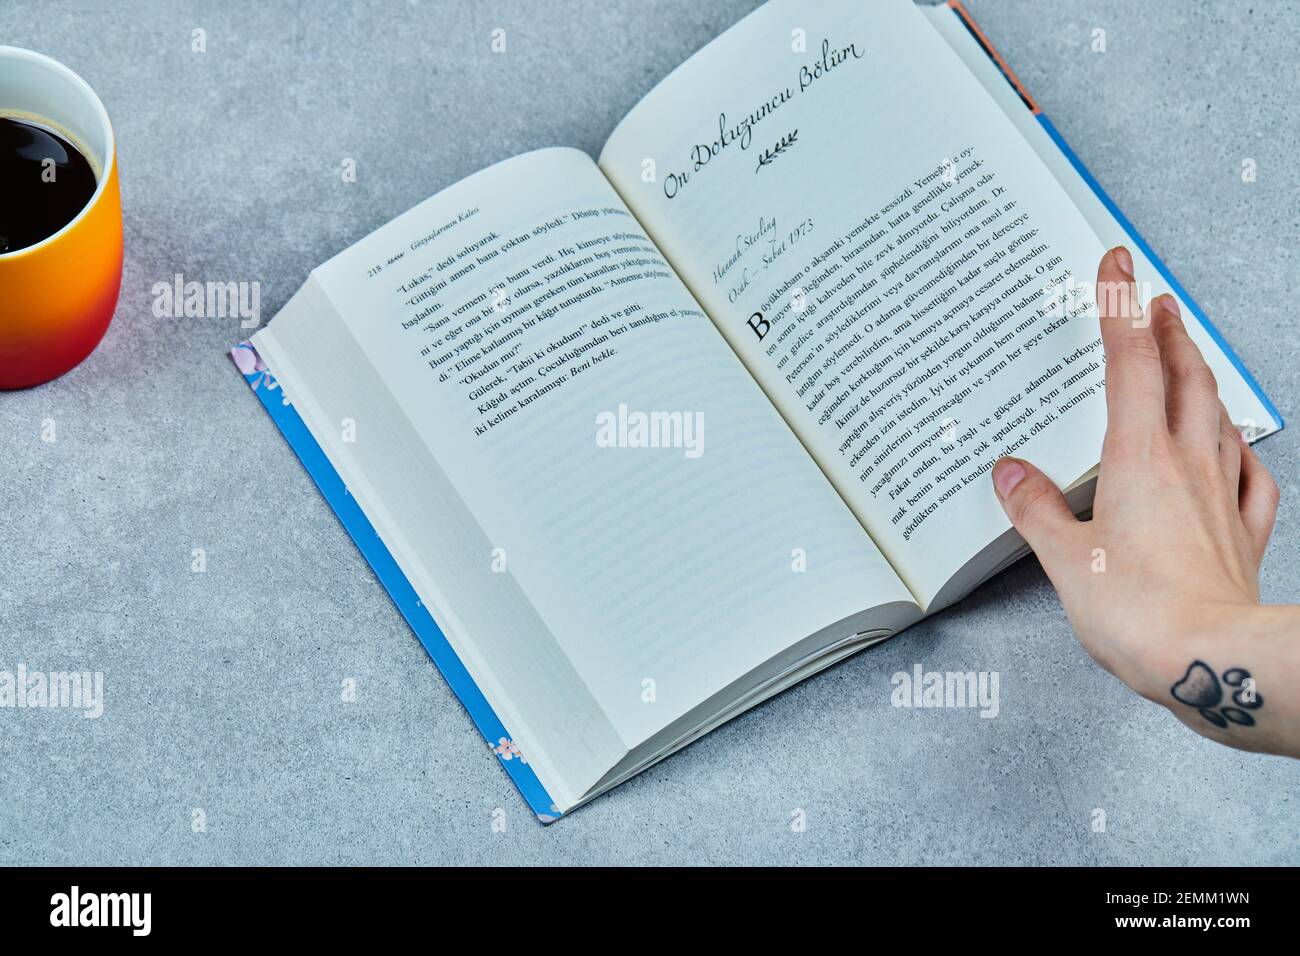 Female Hands Hold Open Bookbusiness Education Literature Read And Library  Concept Stock Illustration - Download Image Now - iStock